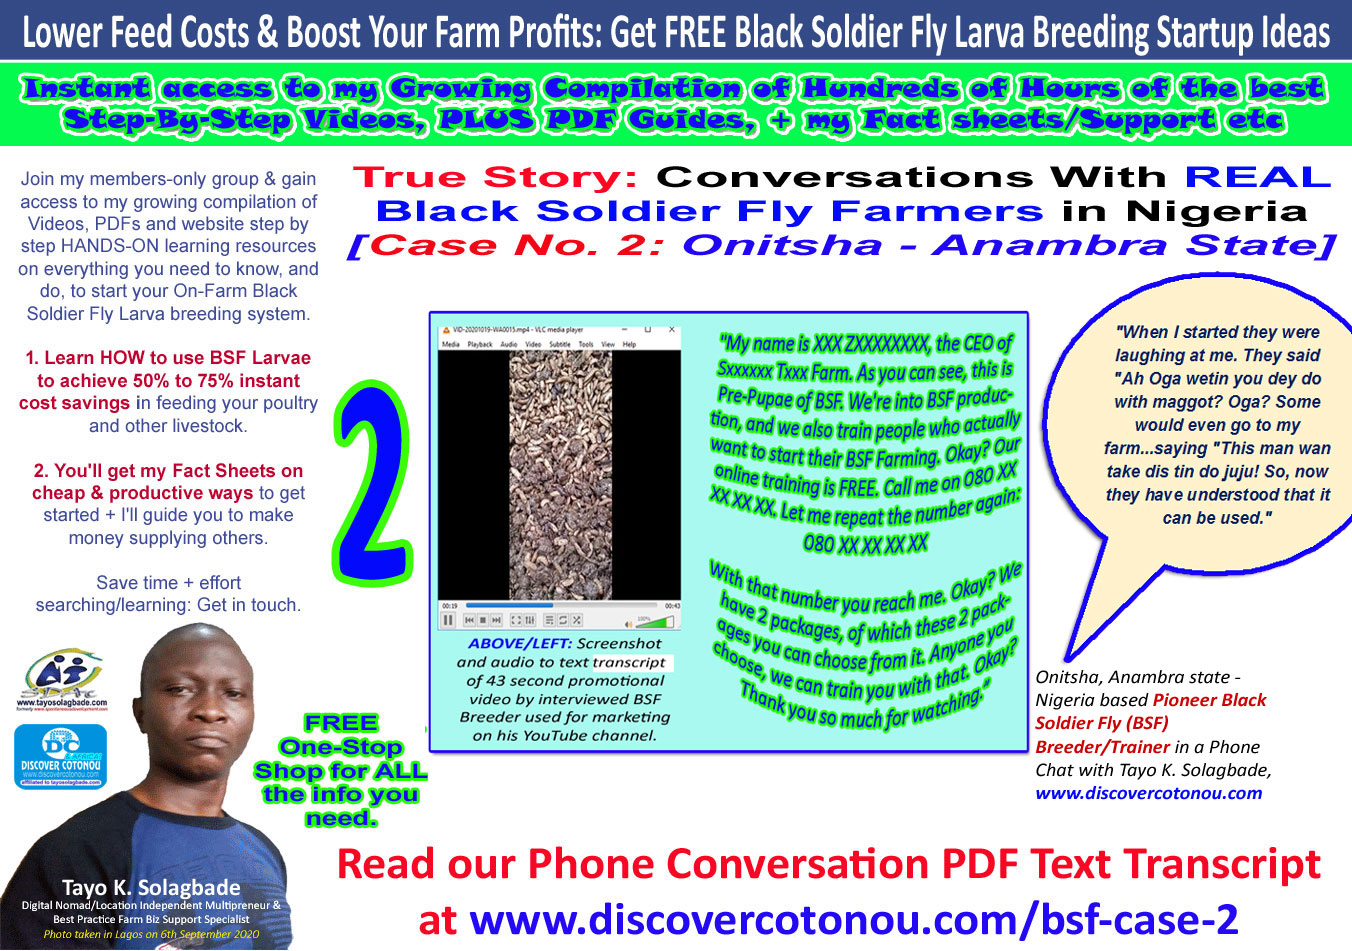 “When I started they were laughing at me.” | True Story: Conversations With REAL Black Soldier Fly Farmers in Nigeria [Case No. 2: Onitsha – Anambra State] – Download PDF Audio to Text Transcript